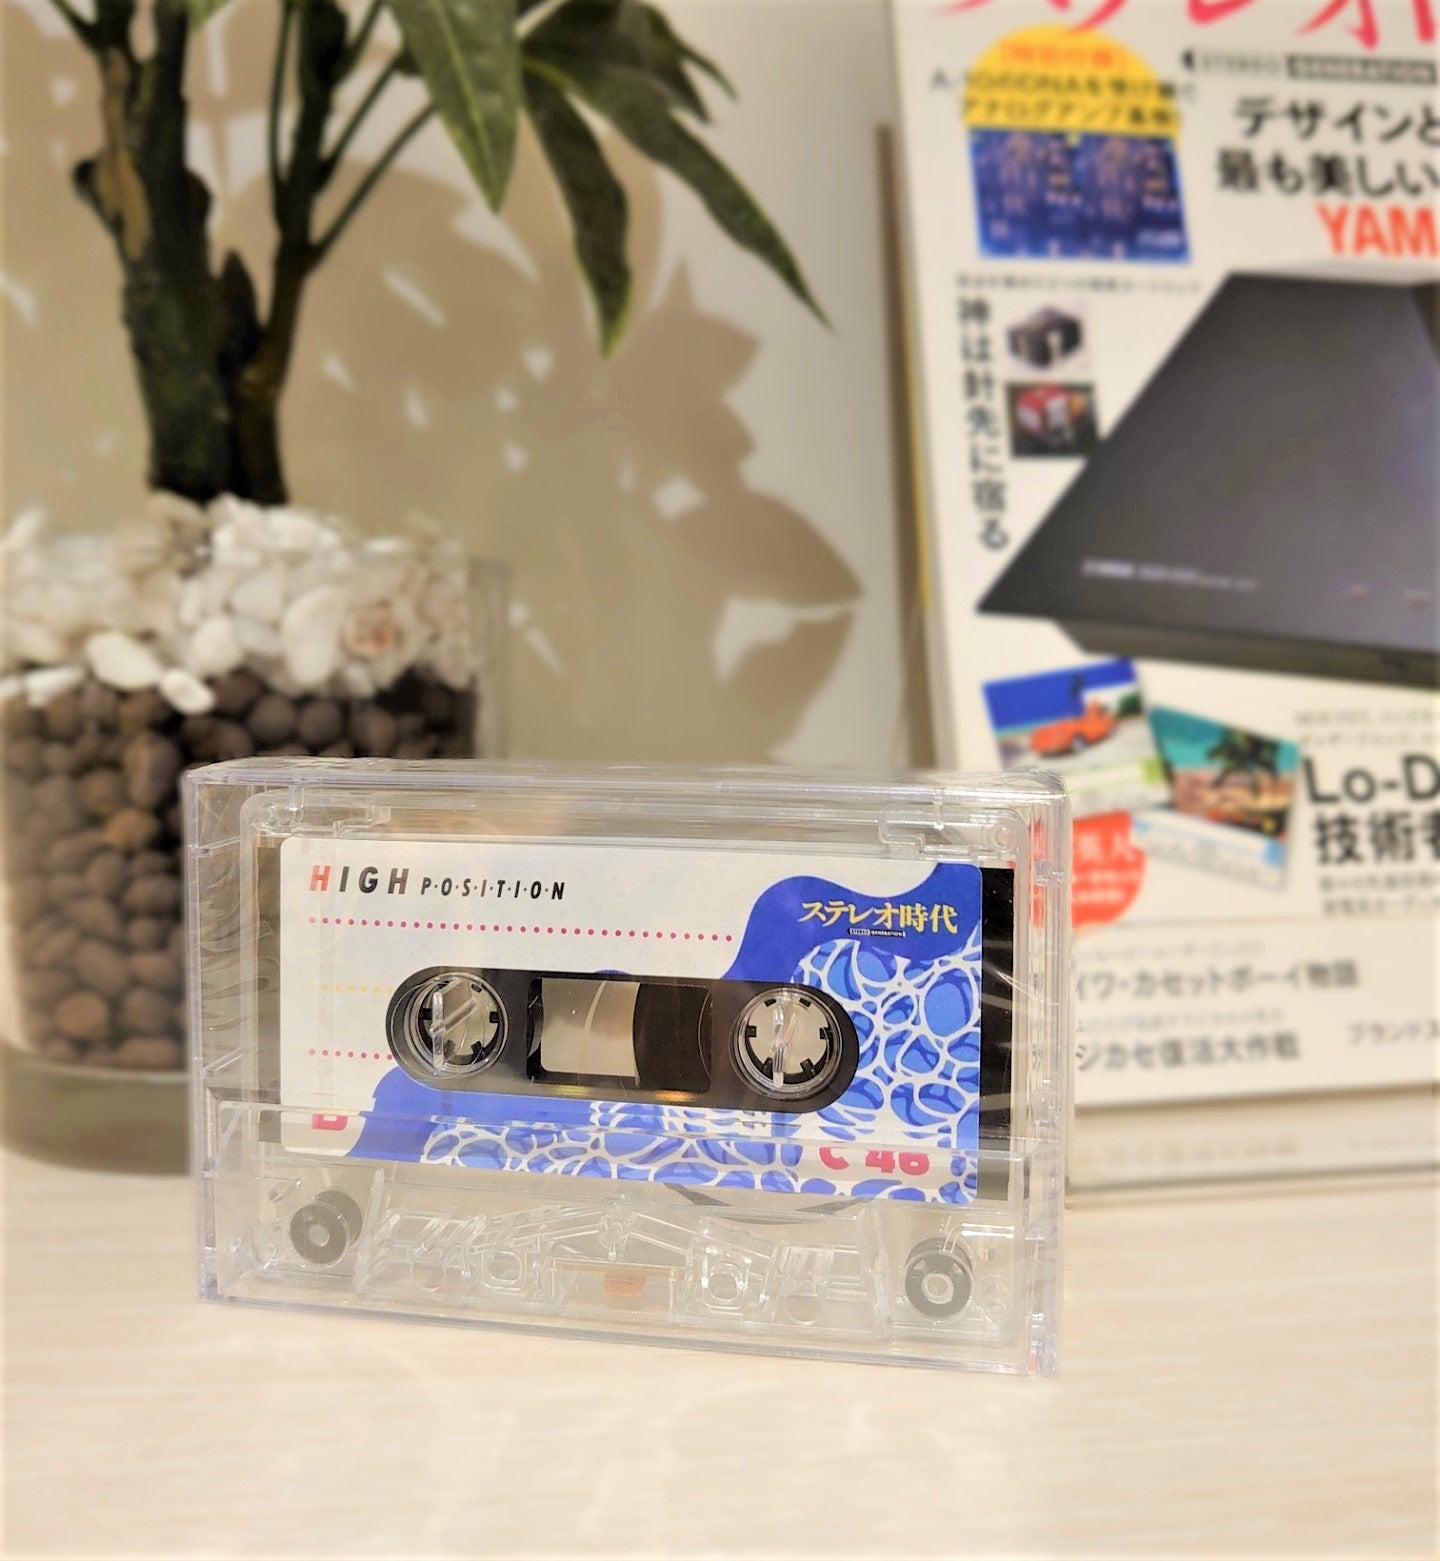 [Limited quantity special pack: High positive cassette included] Stereo era 80's 